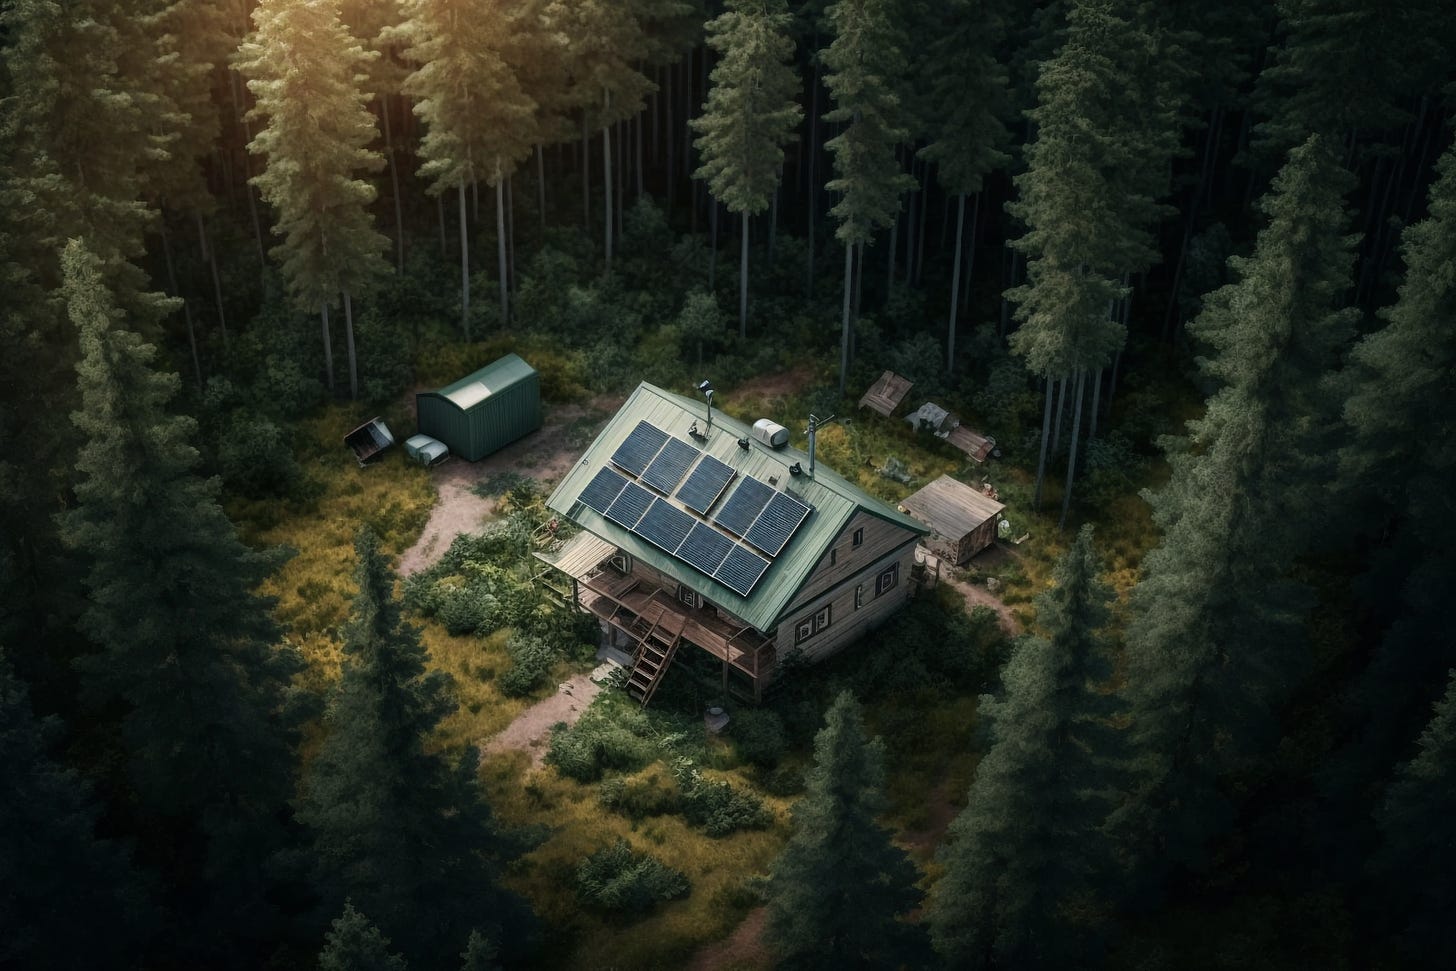 a small cabin is visible in a clearing in the woods, amateur radio antennas and solar panels are visible on the roof